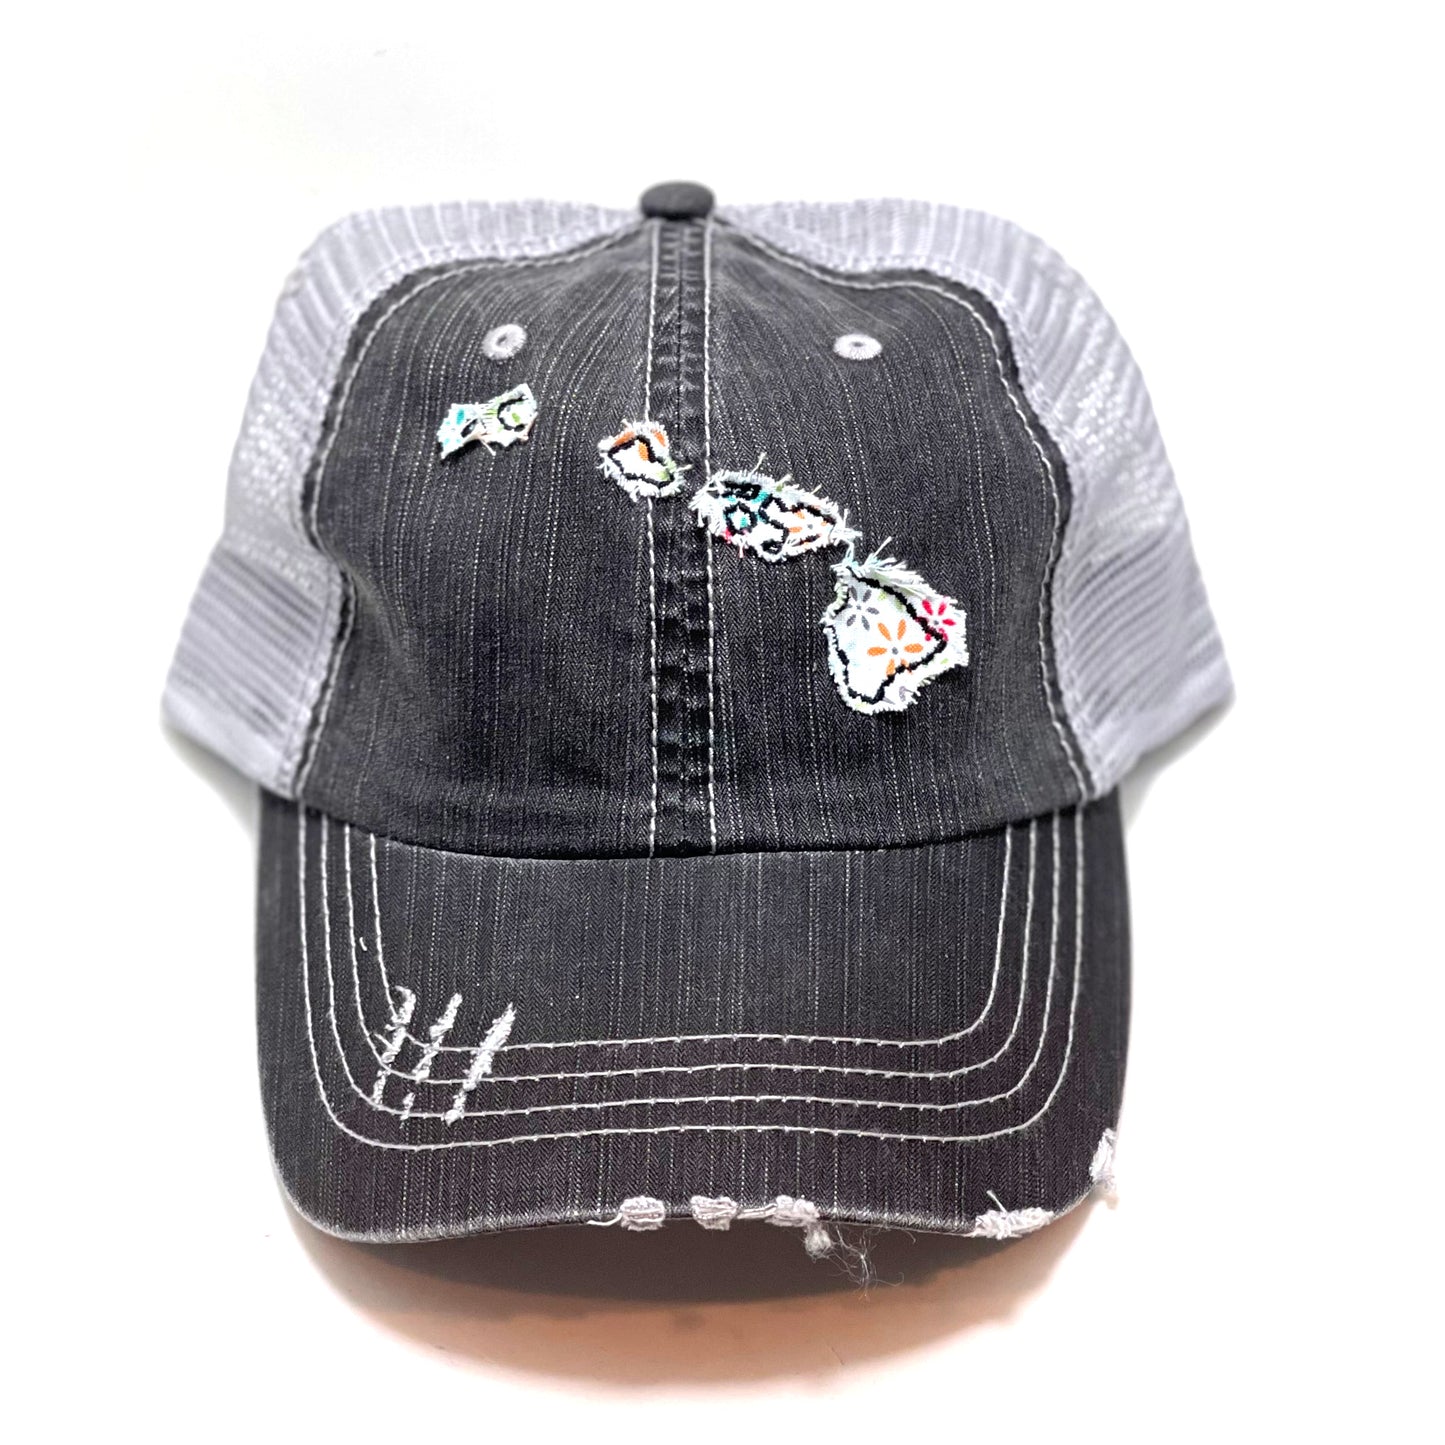 gray distressed trucker hat with gray floral fabric state of Hawaii